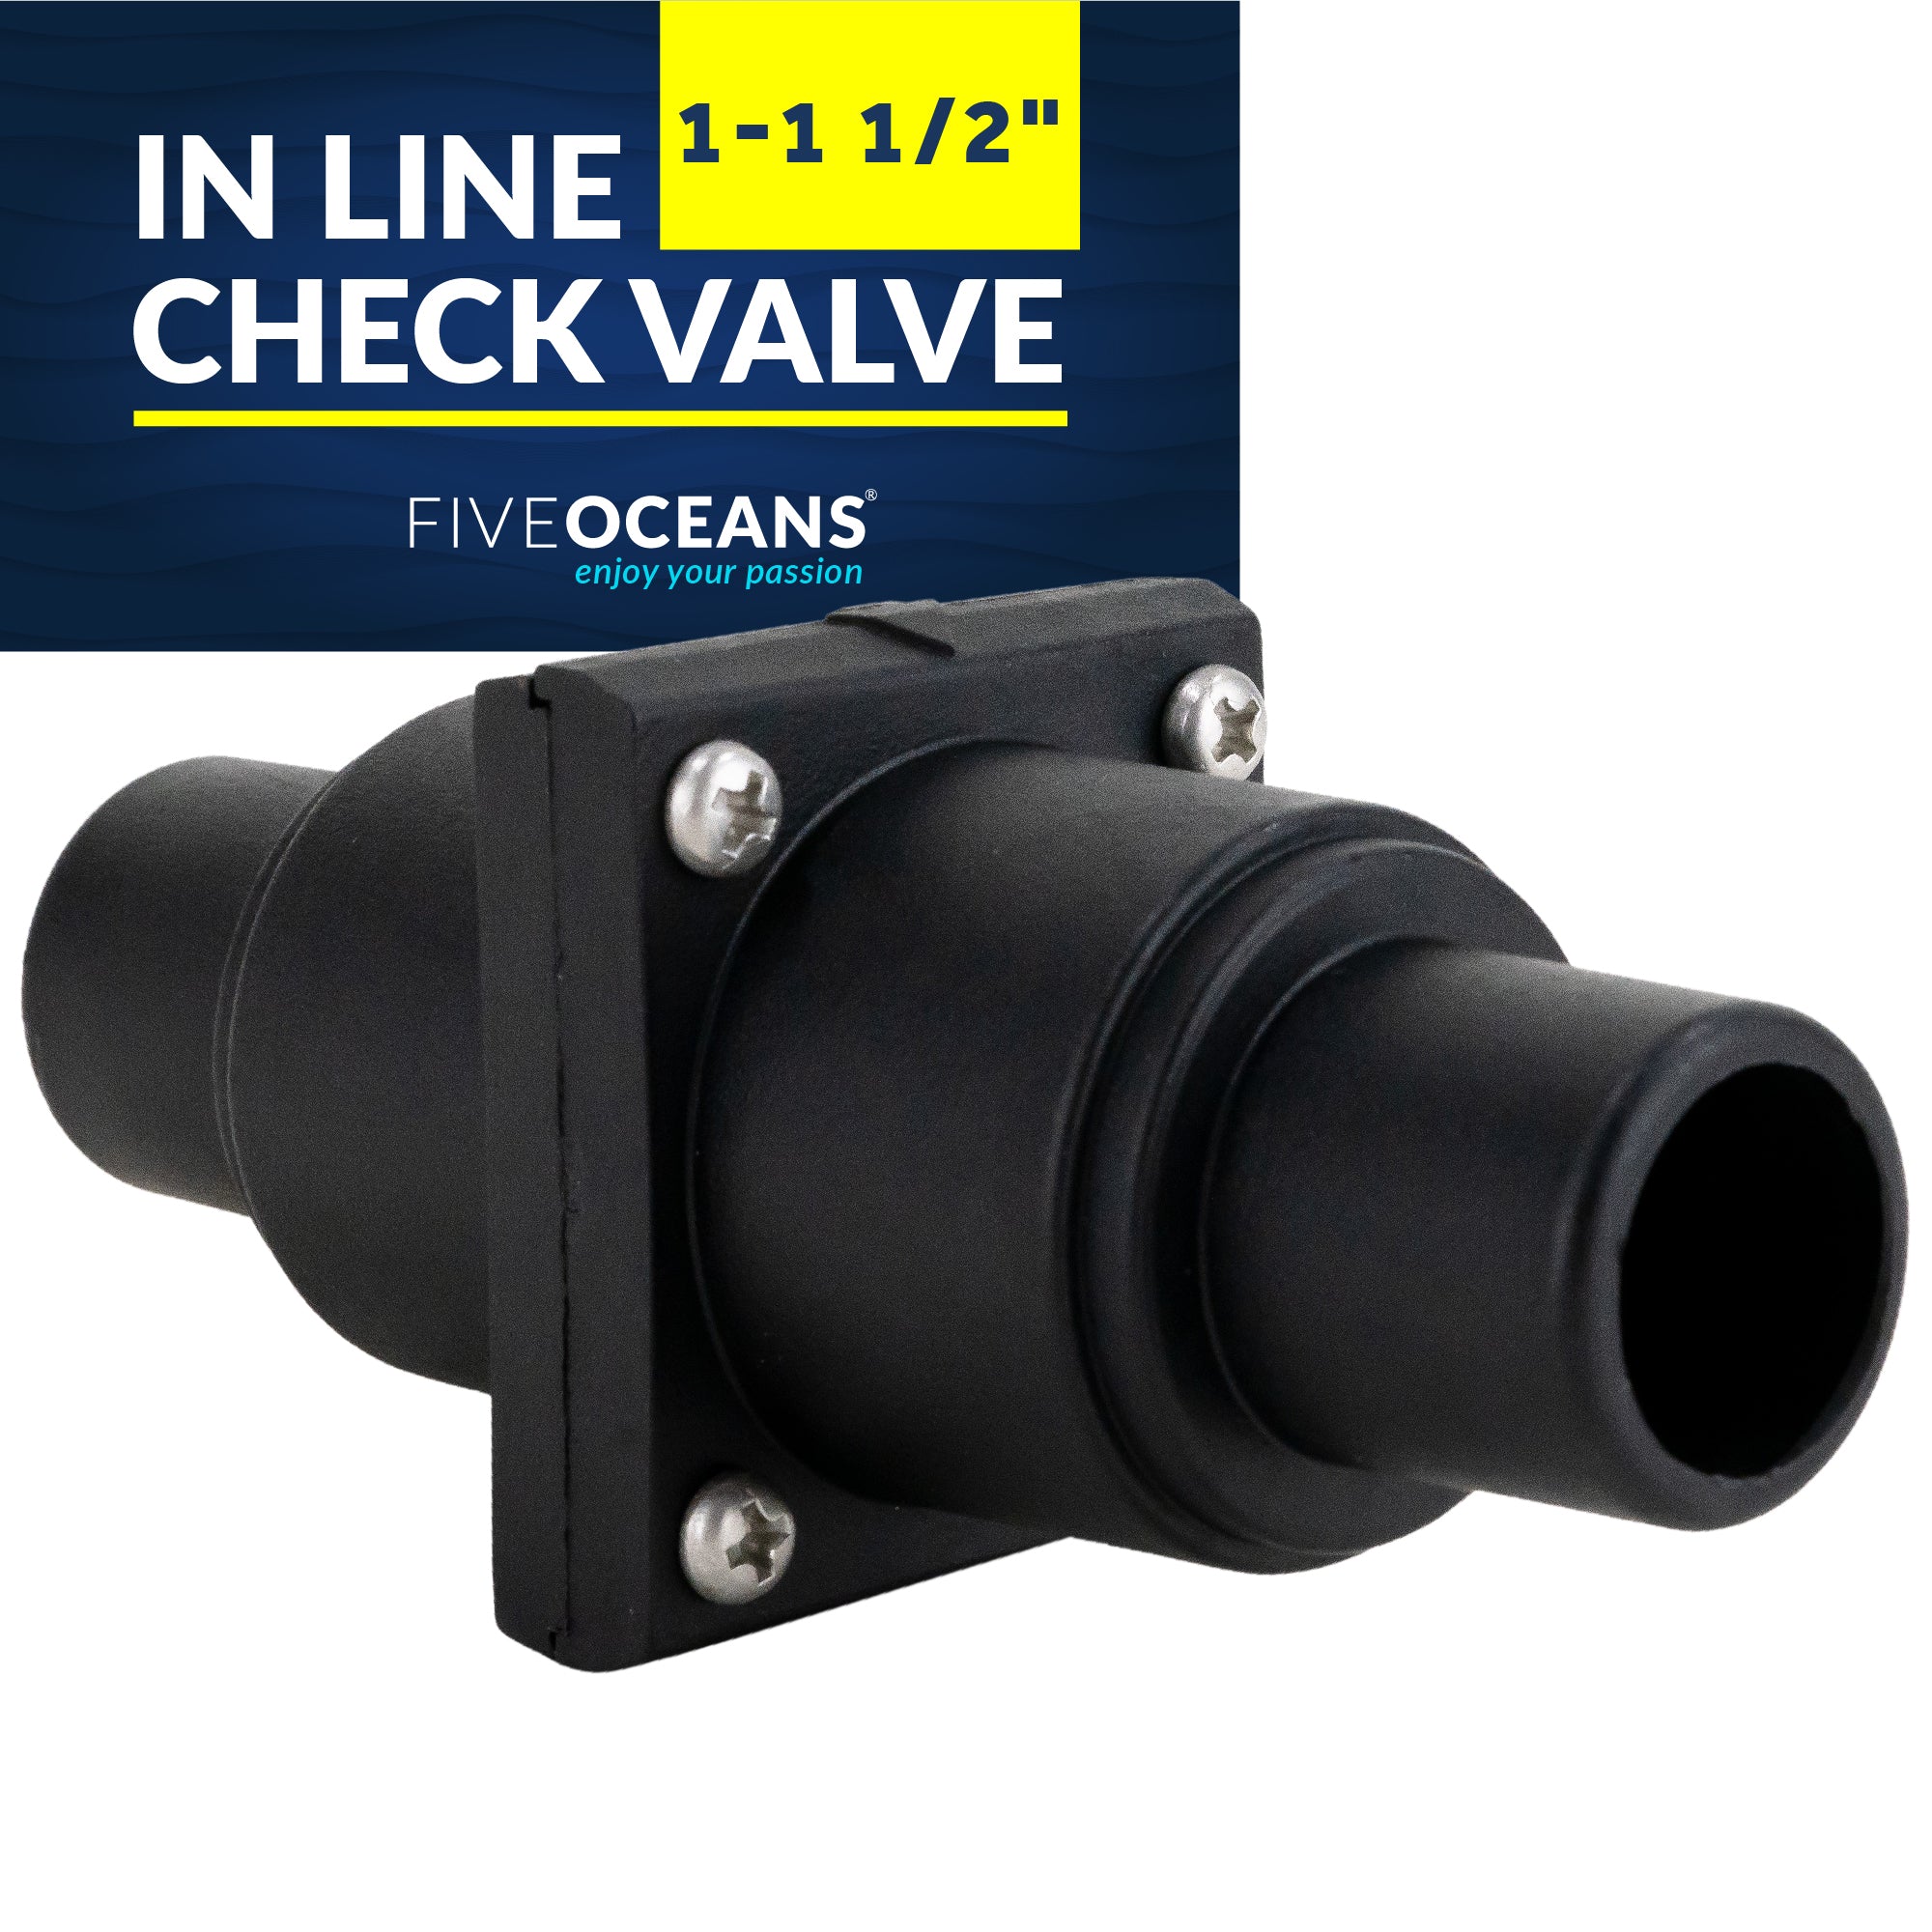 1-1 1/2" Check Valve, In-Line One-Way Stepped Connection - FO4142